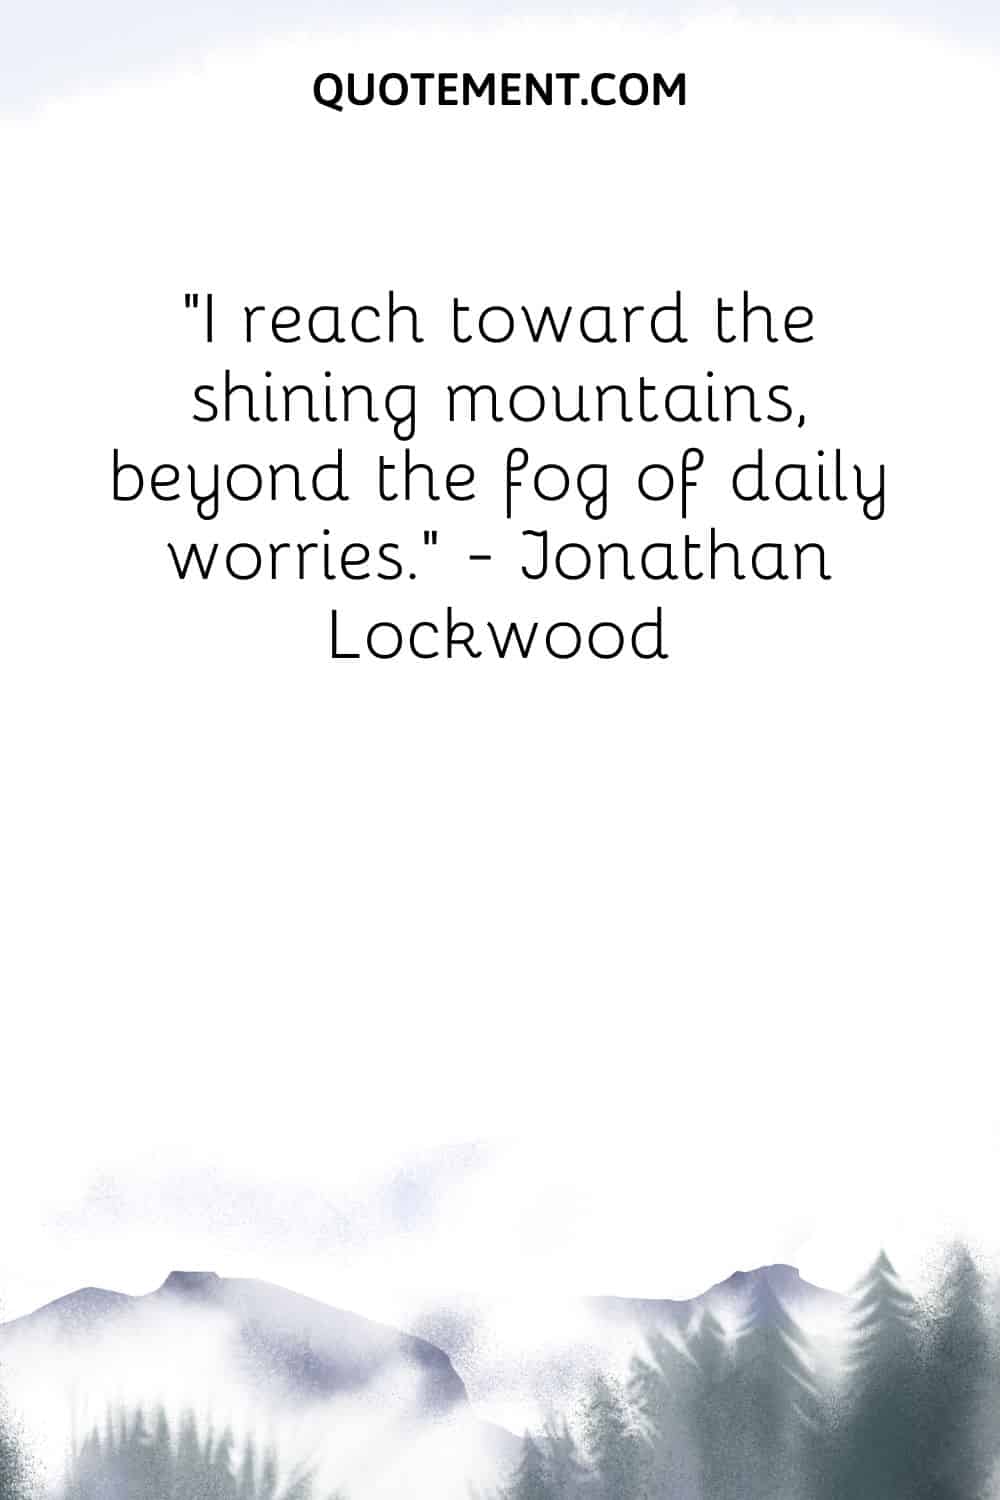 I reach toward the shining mountains, beyond the fog of daily worries